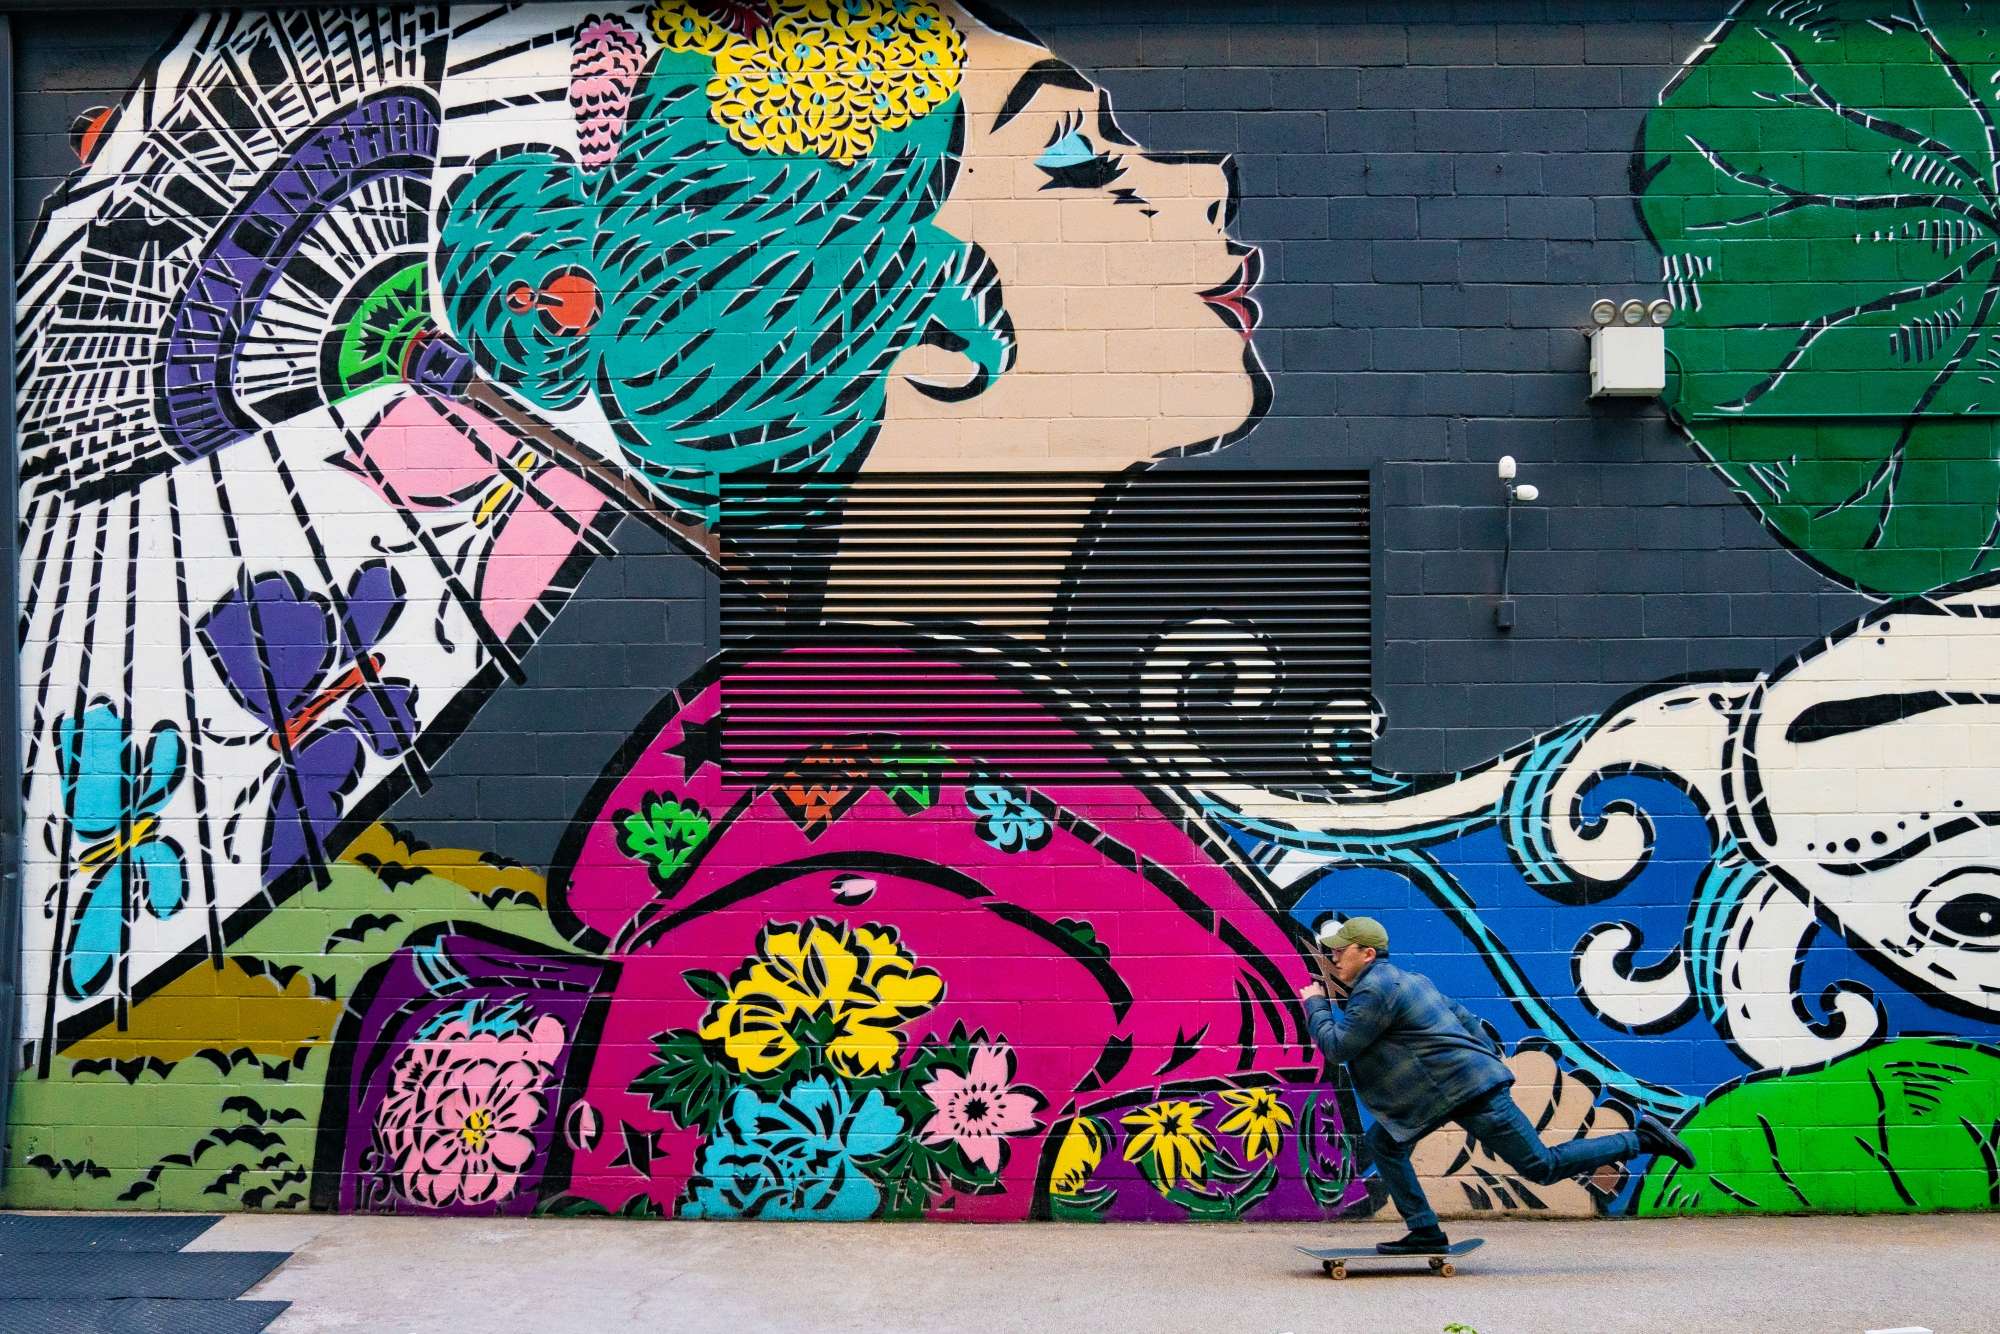 Someone is skating boarding by an outdoor mural.